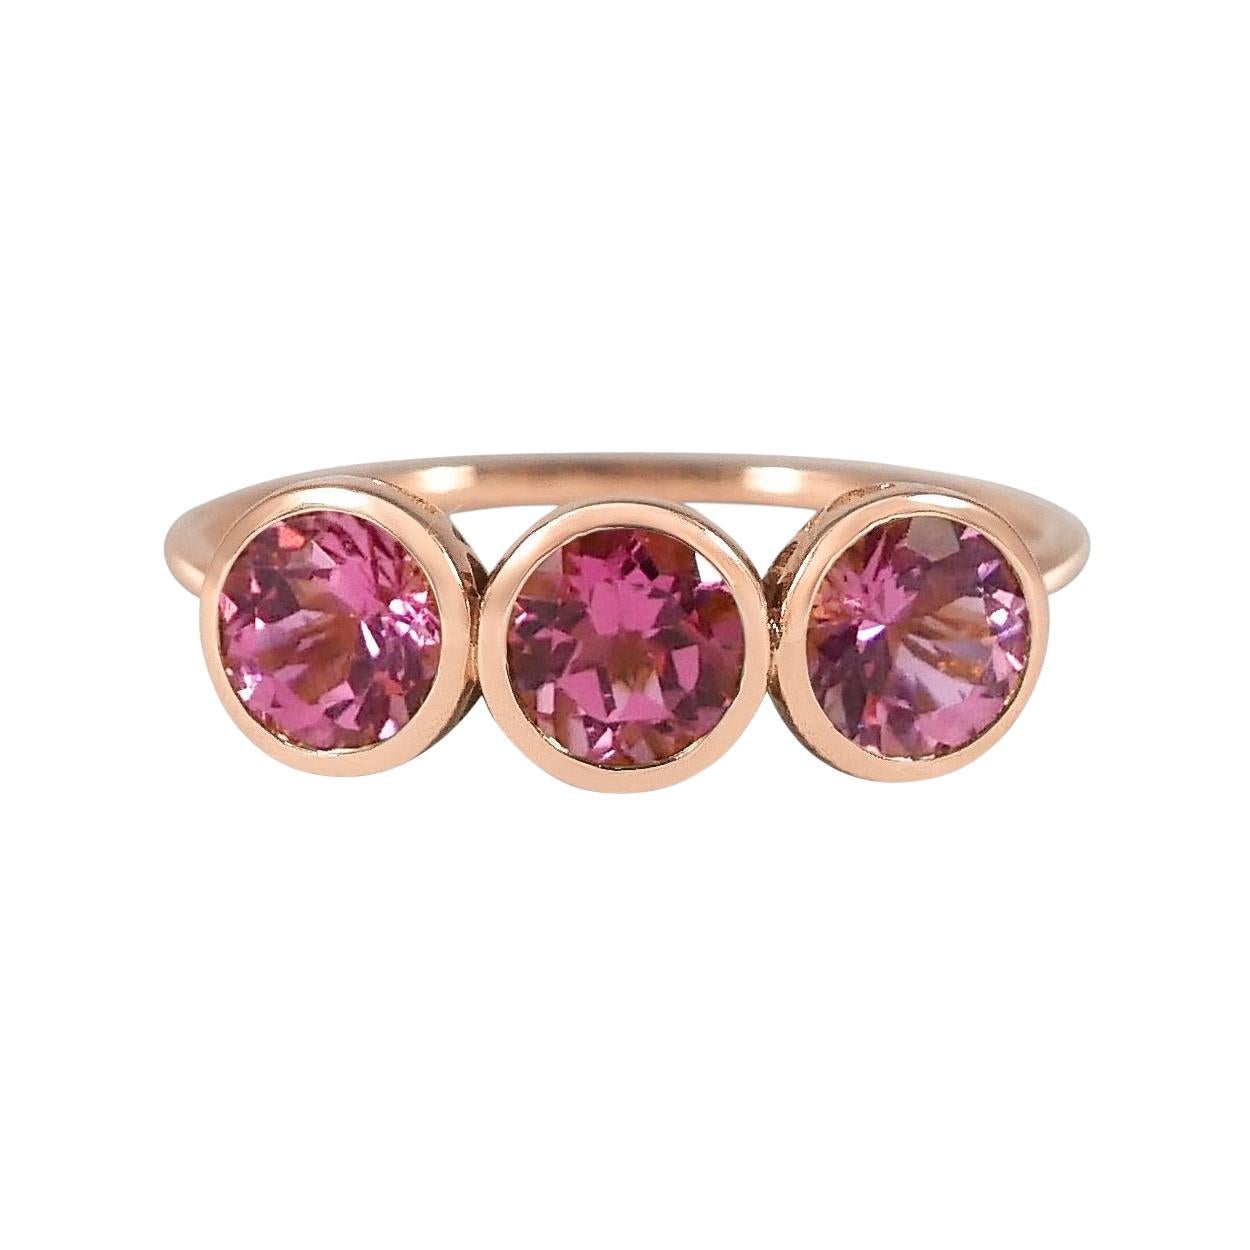 For Sale:  Handcrafted 1.50 Carats Pink Tourmalines 18 Karat Rose Gold Three-Stone Ring